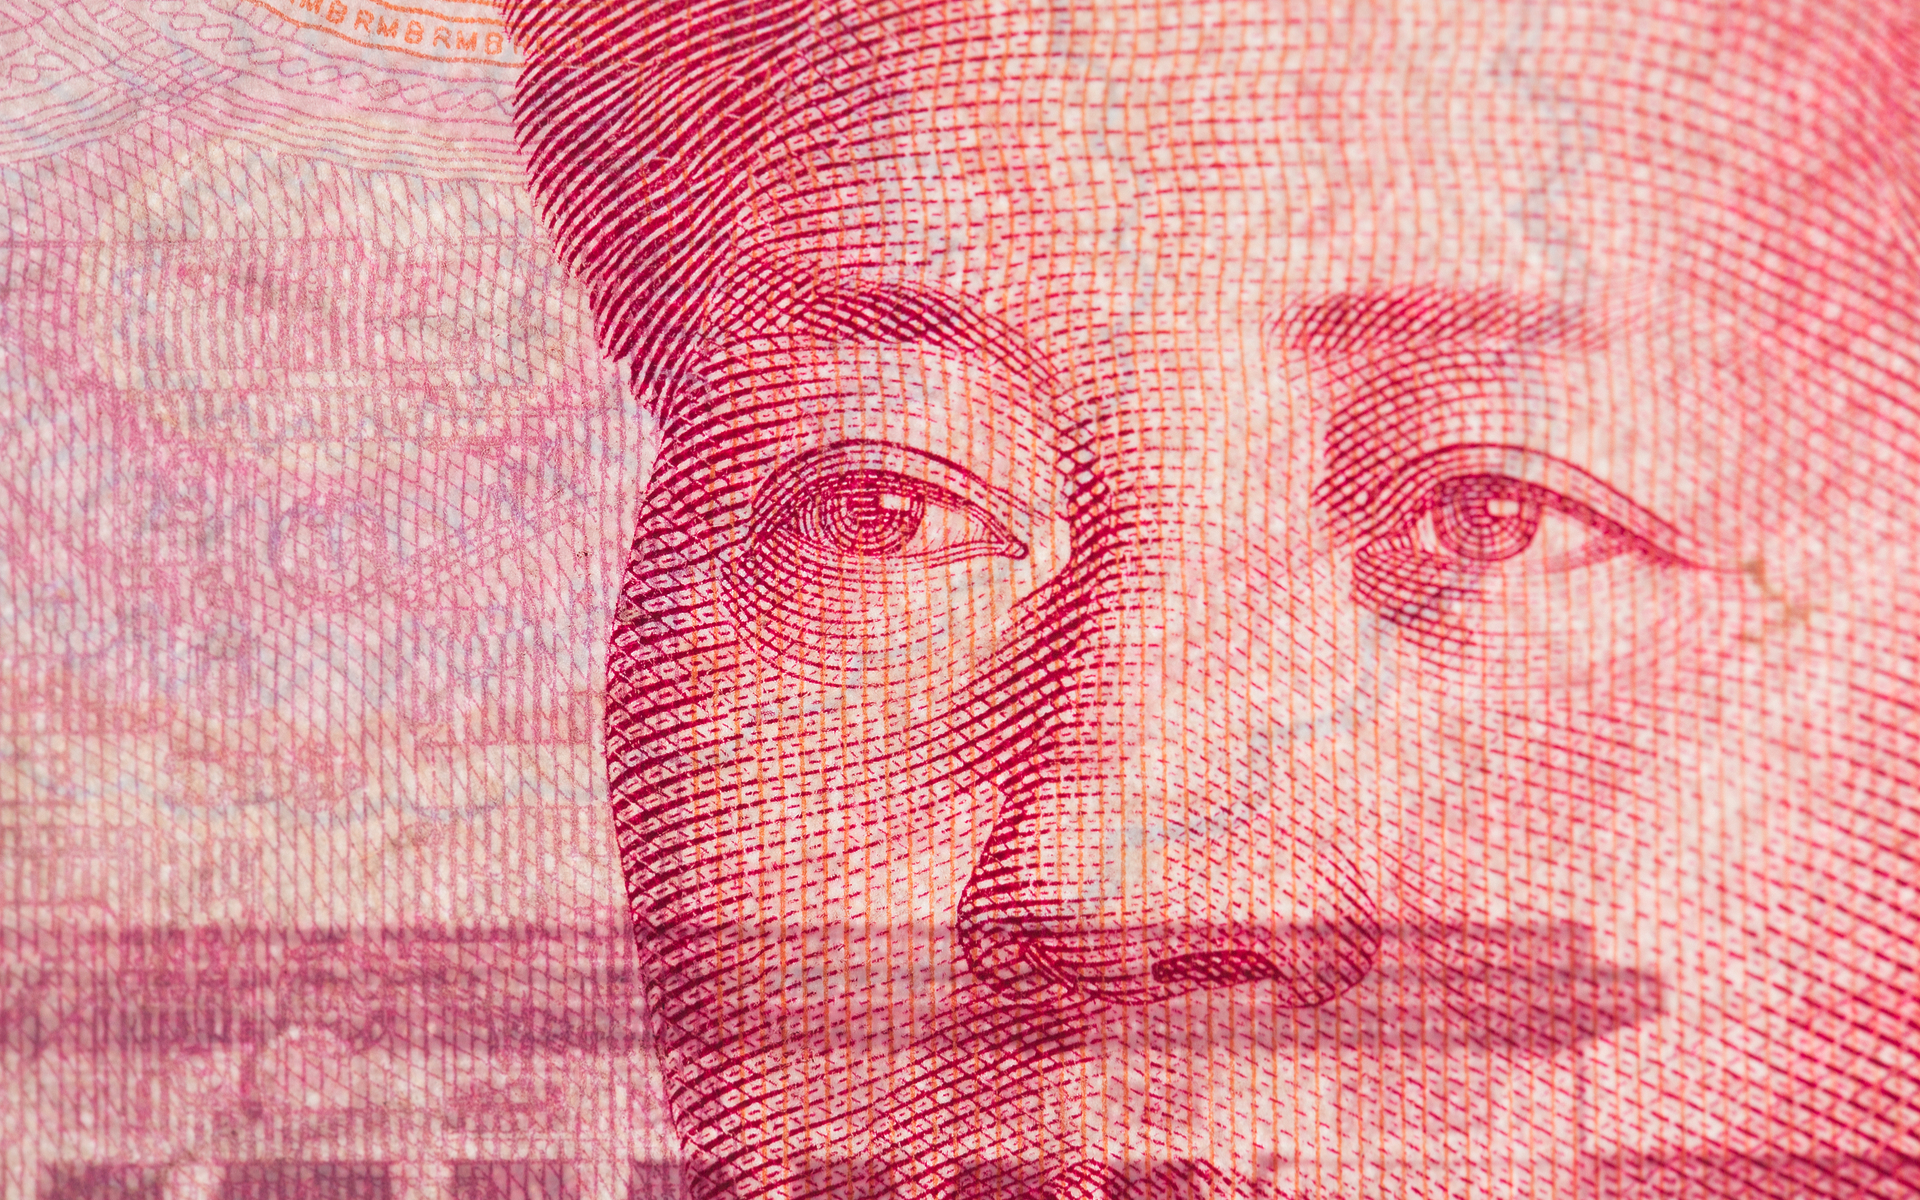 All Eyes on Beijing as Bitcoin Investors Anxious for Stability